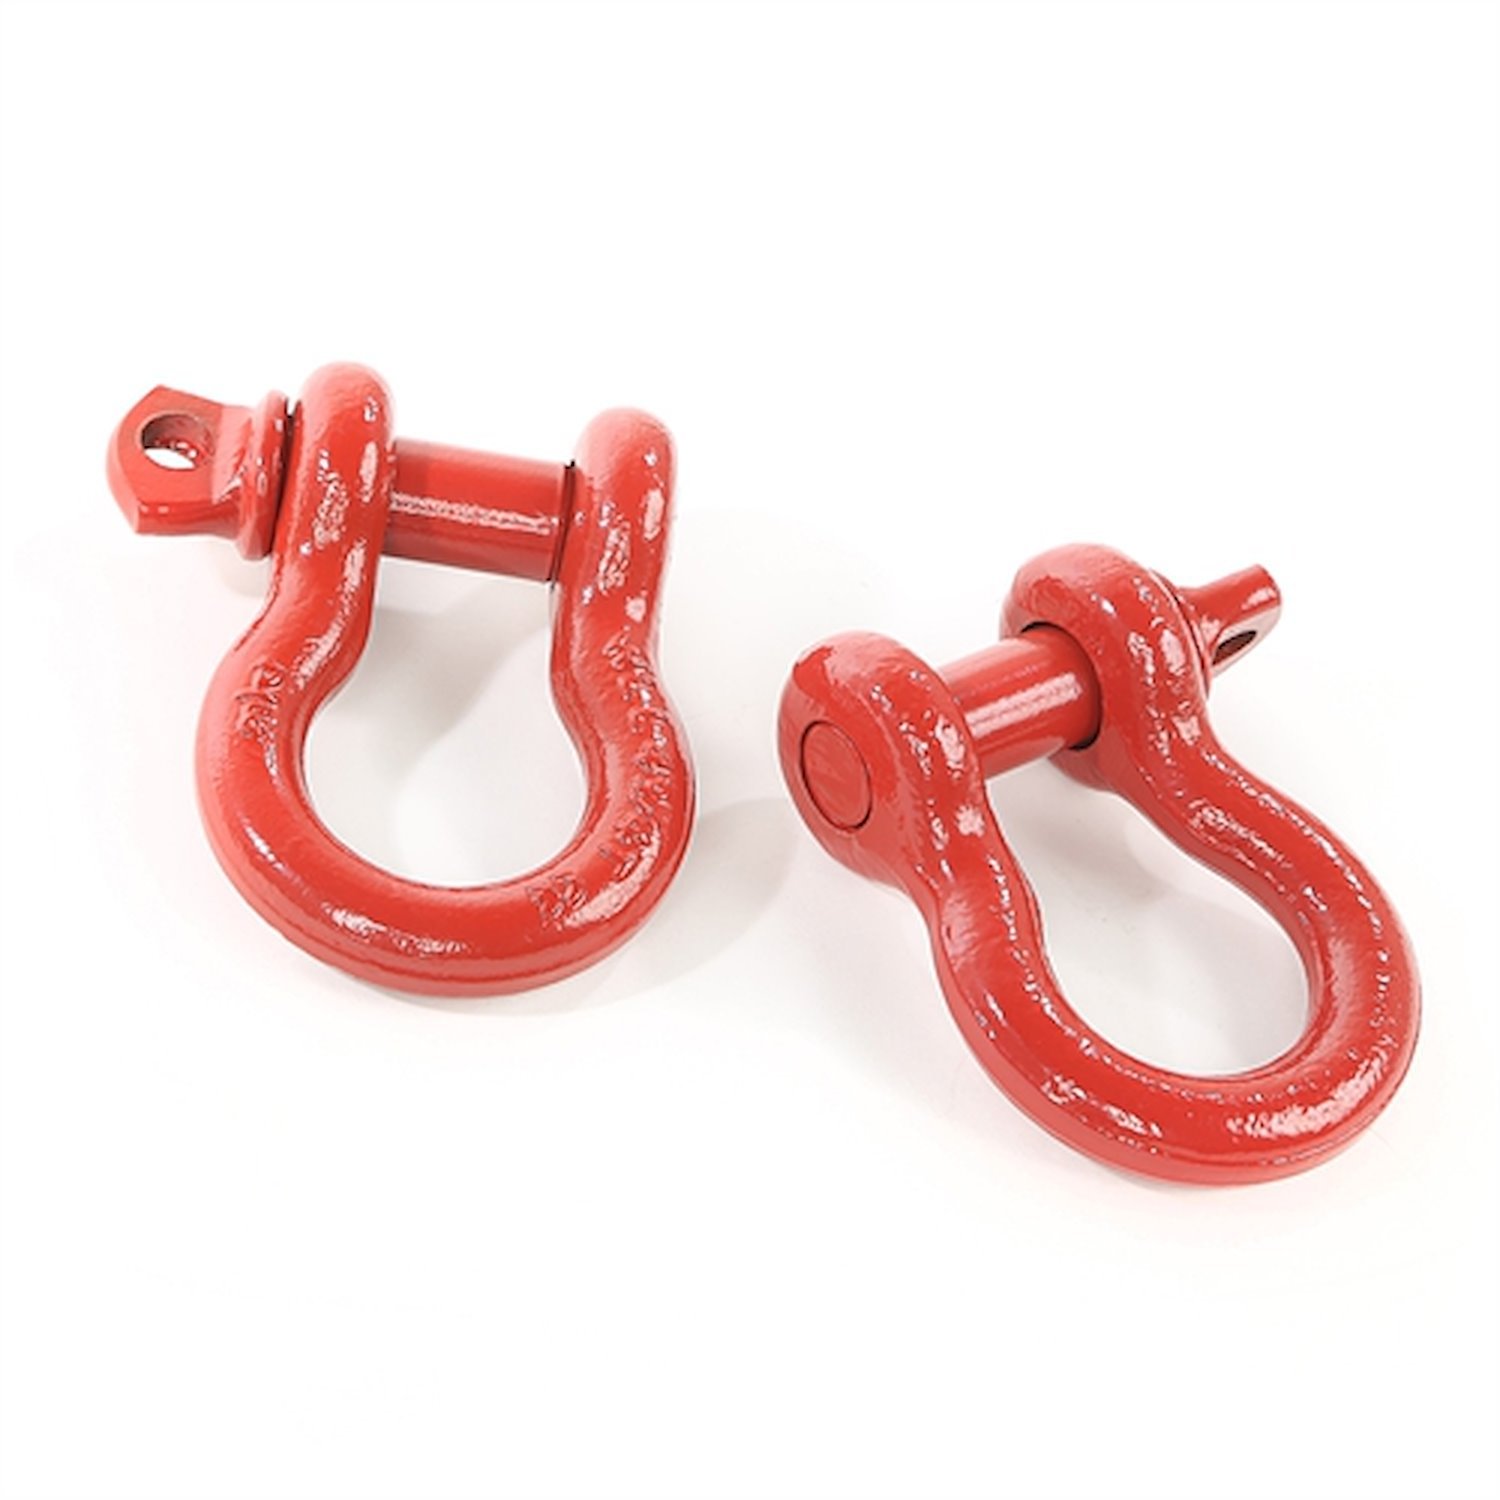 3/4 In. D-Ring Shackles [Red]